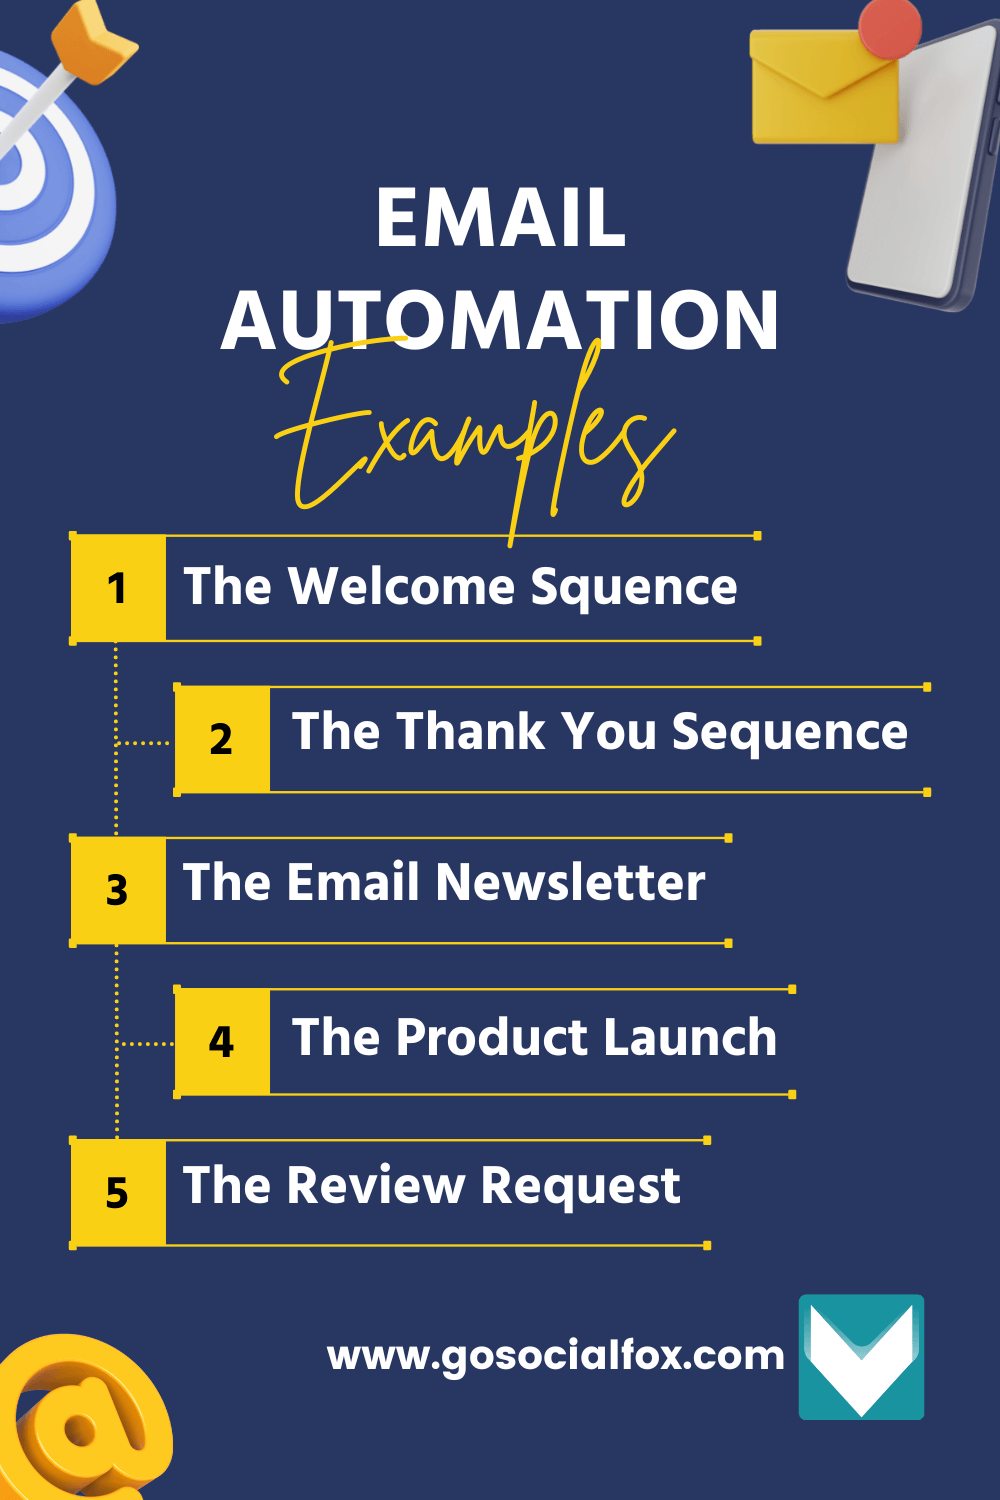 The Complete Guide to Email Automation